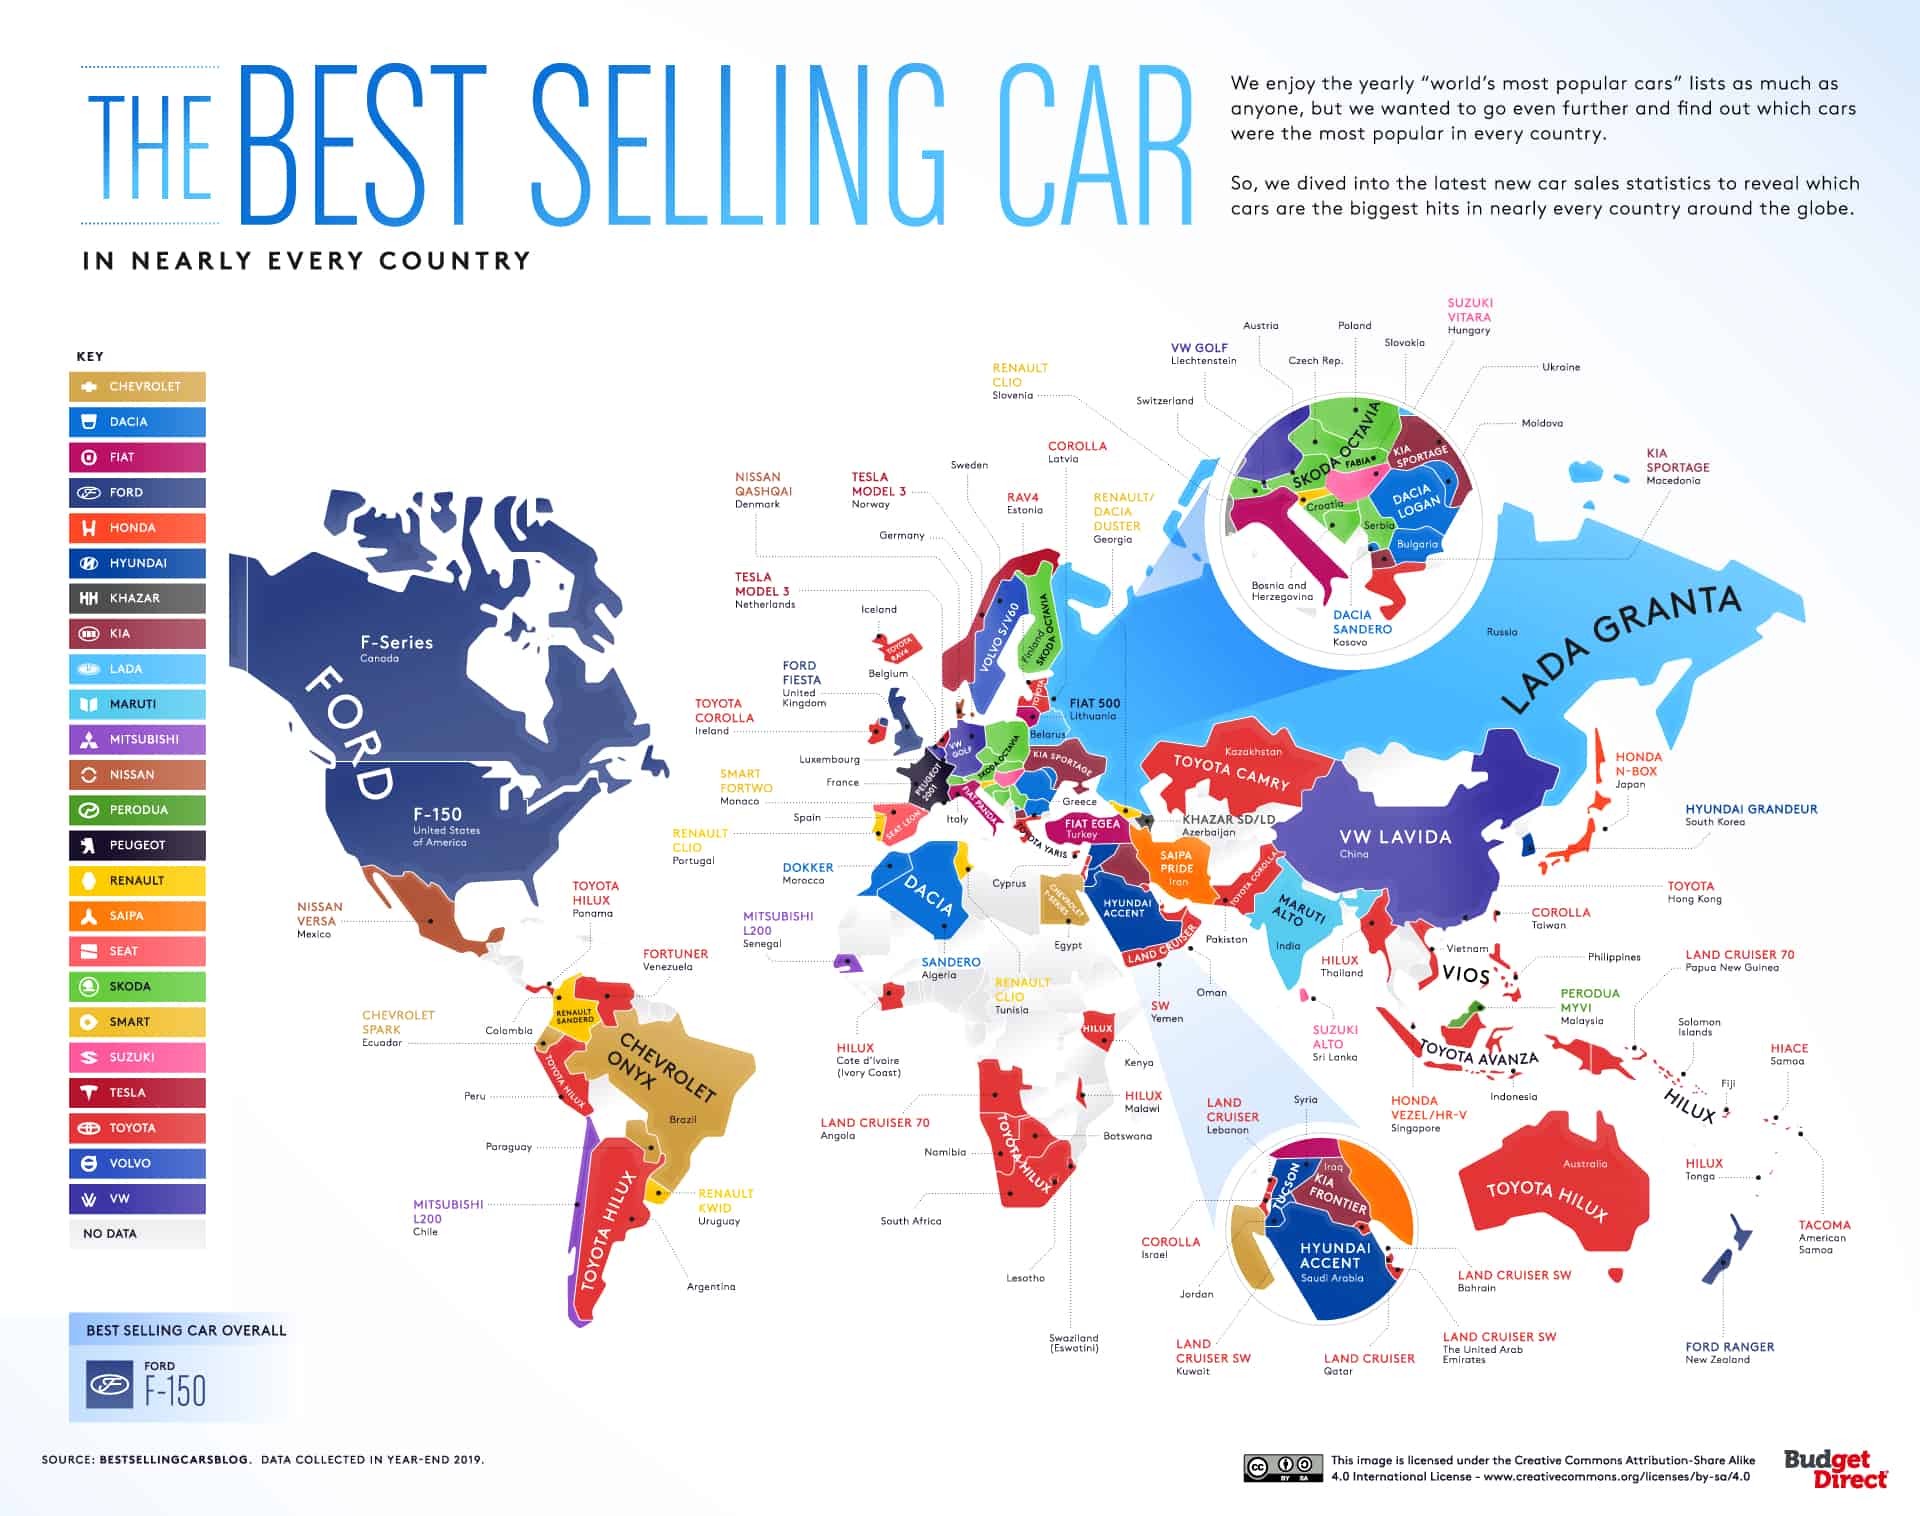 The bestselling new vehicles in countries around the world